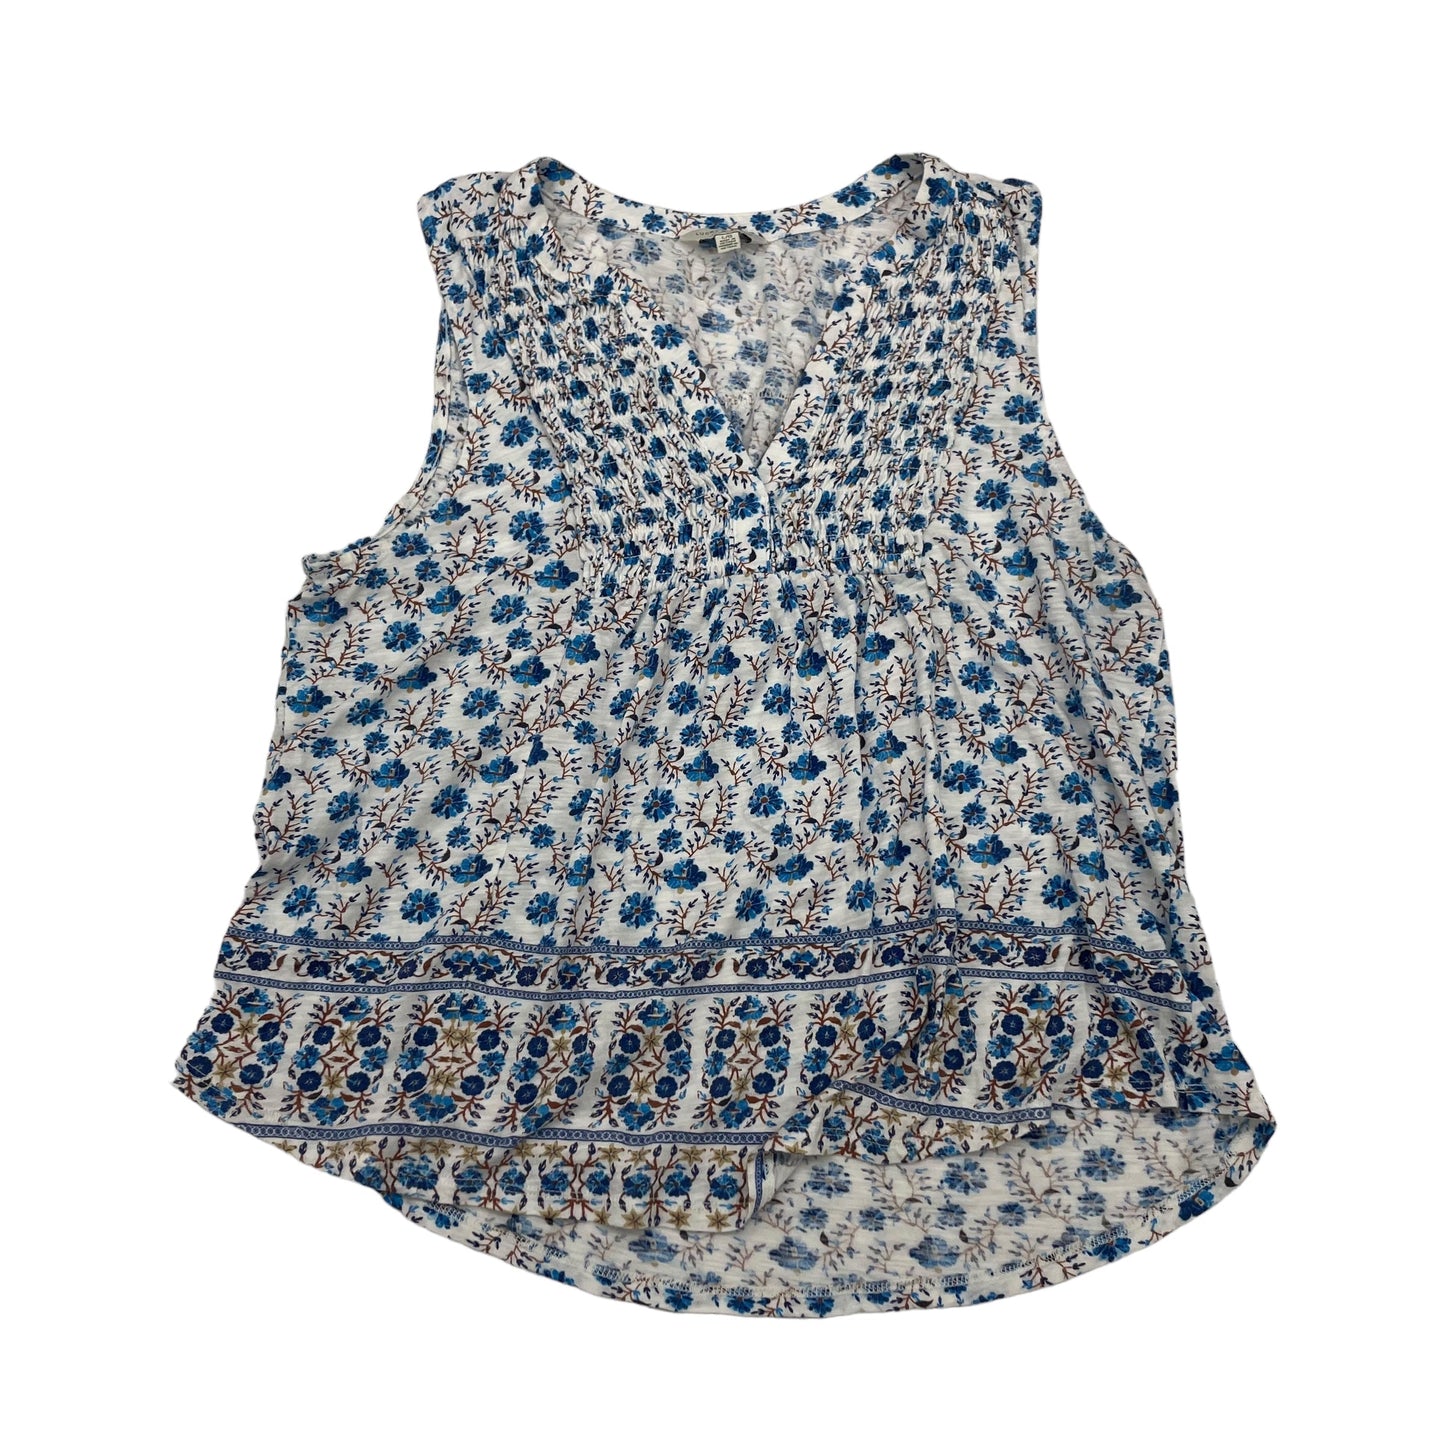 BLUE & WHITE LUCKY BRAND TOP SLEEVELESS, Size L